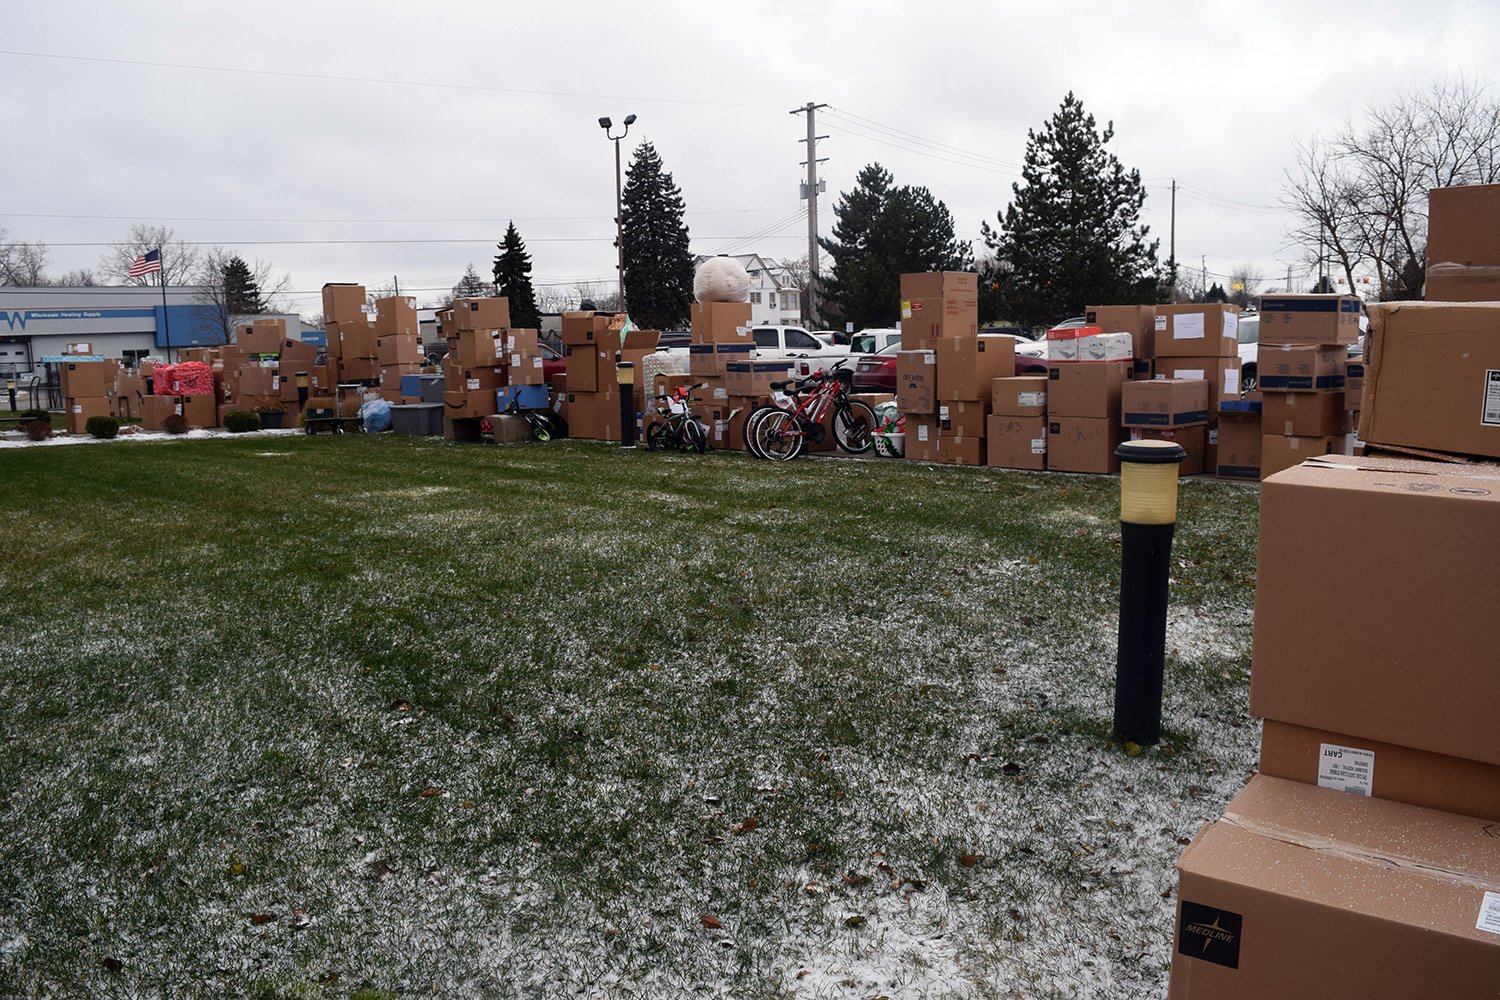  Adopt A Family gifts are lined up outside of Oakland Family Services’ Pontiac office in 2019, the last year the agency was able to collect physical gifts. This year marks an exciting return to Adopt A Family tradition! 